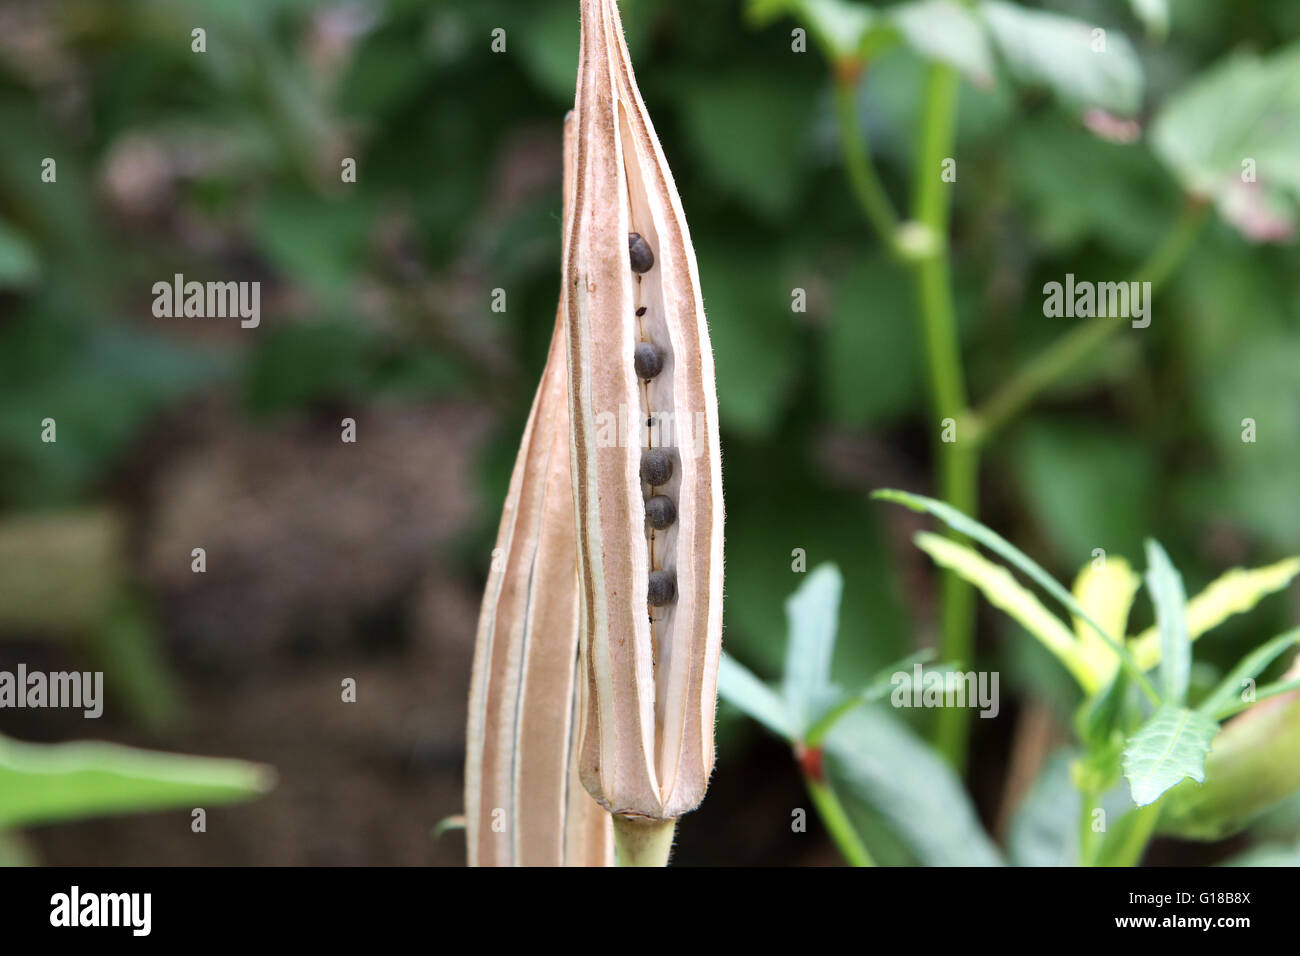 Close up image of Abelmoschus esculentus  or known Okra or  Ladies' Fingers, ochro or gumbo seeds in seed pods Stock Photo